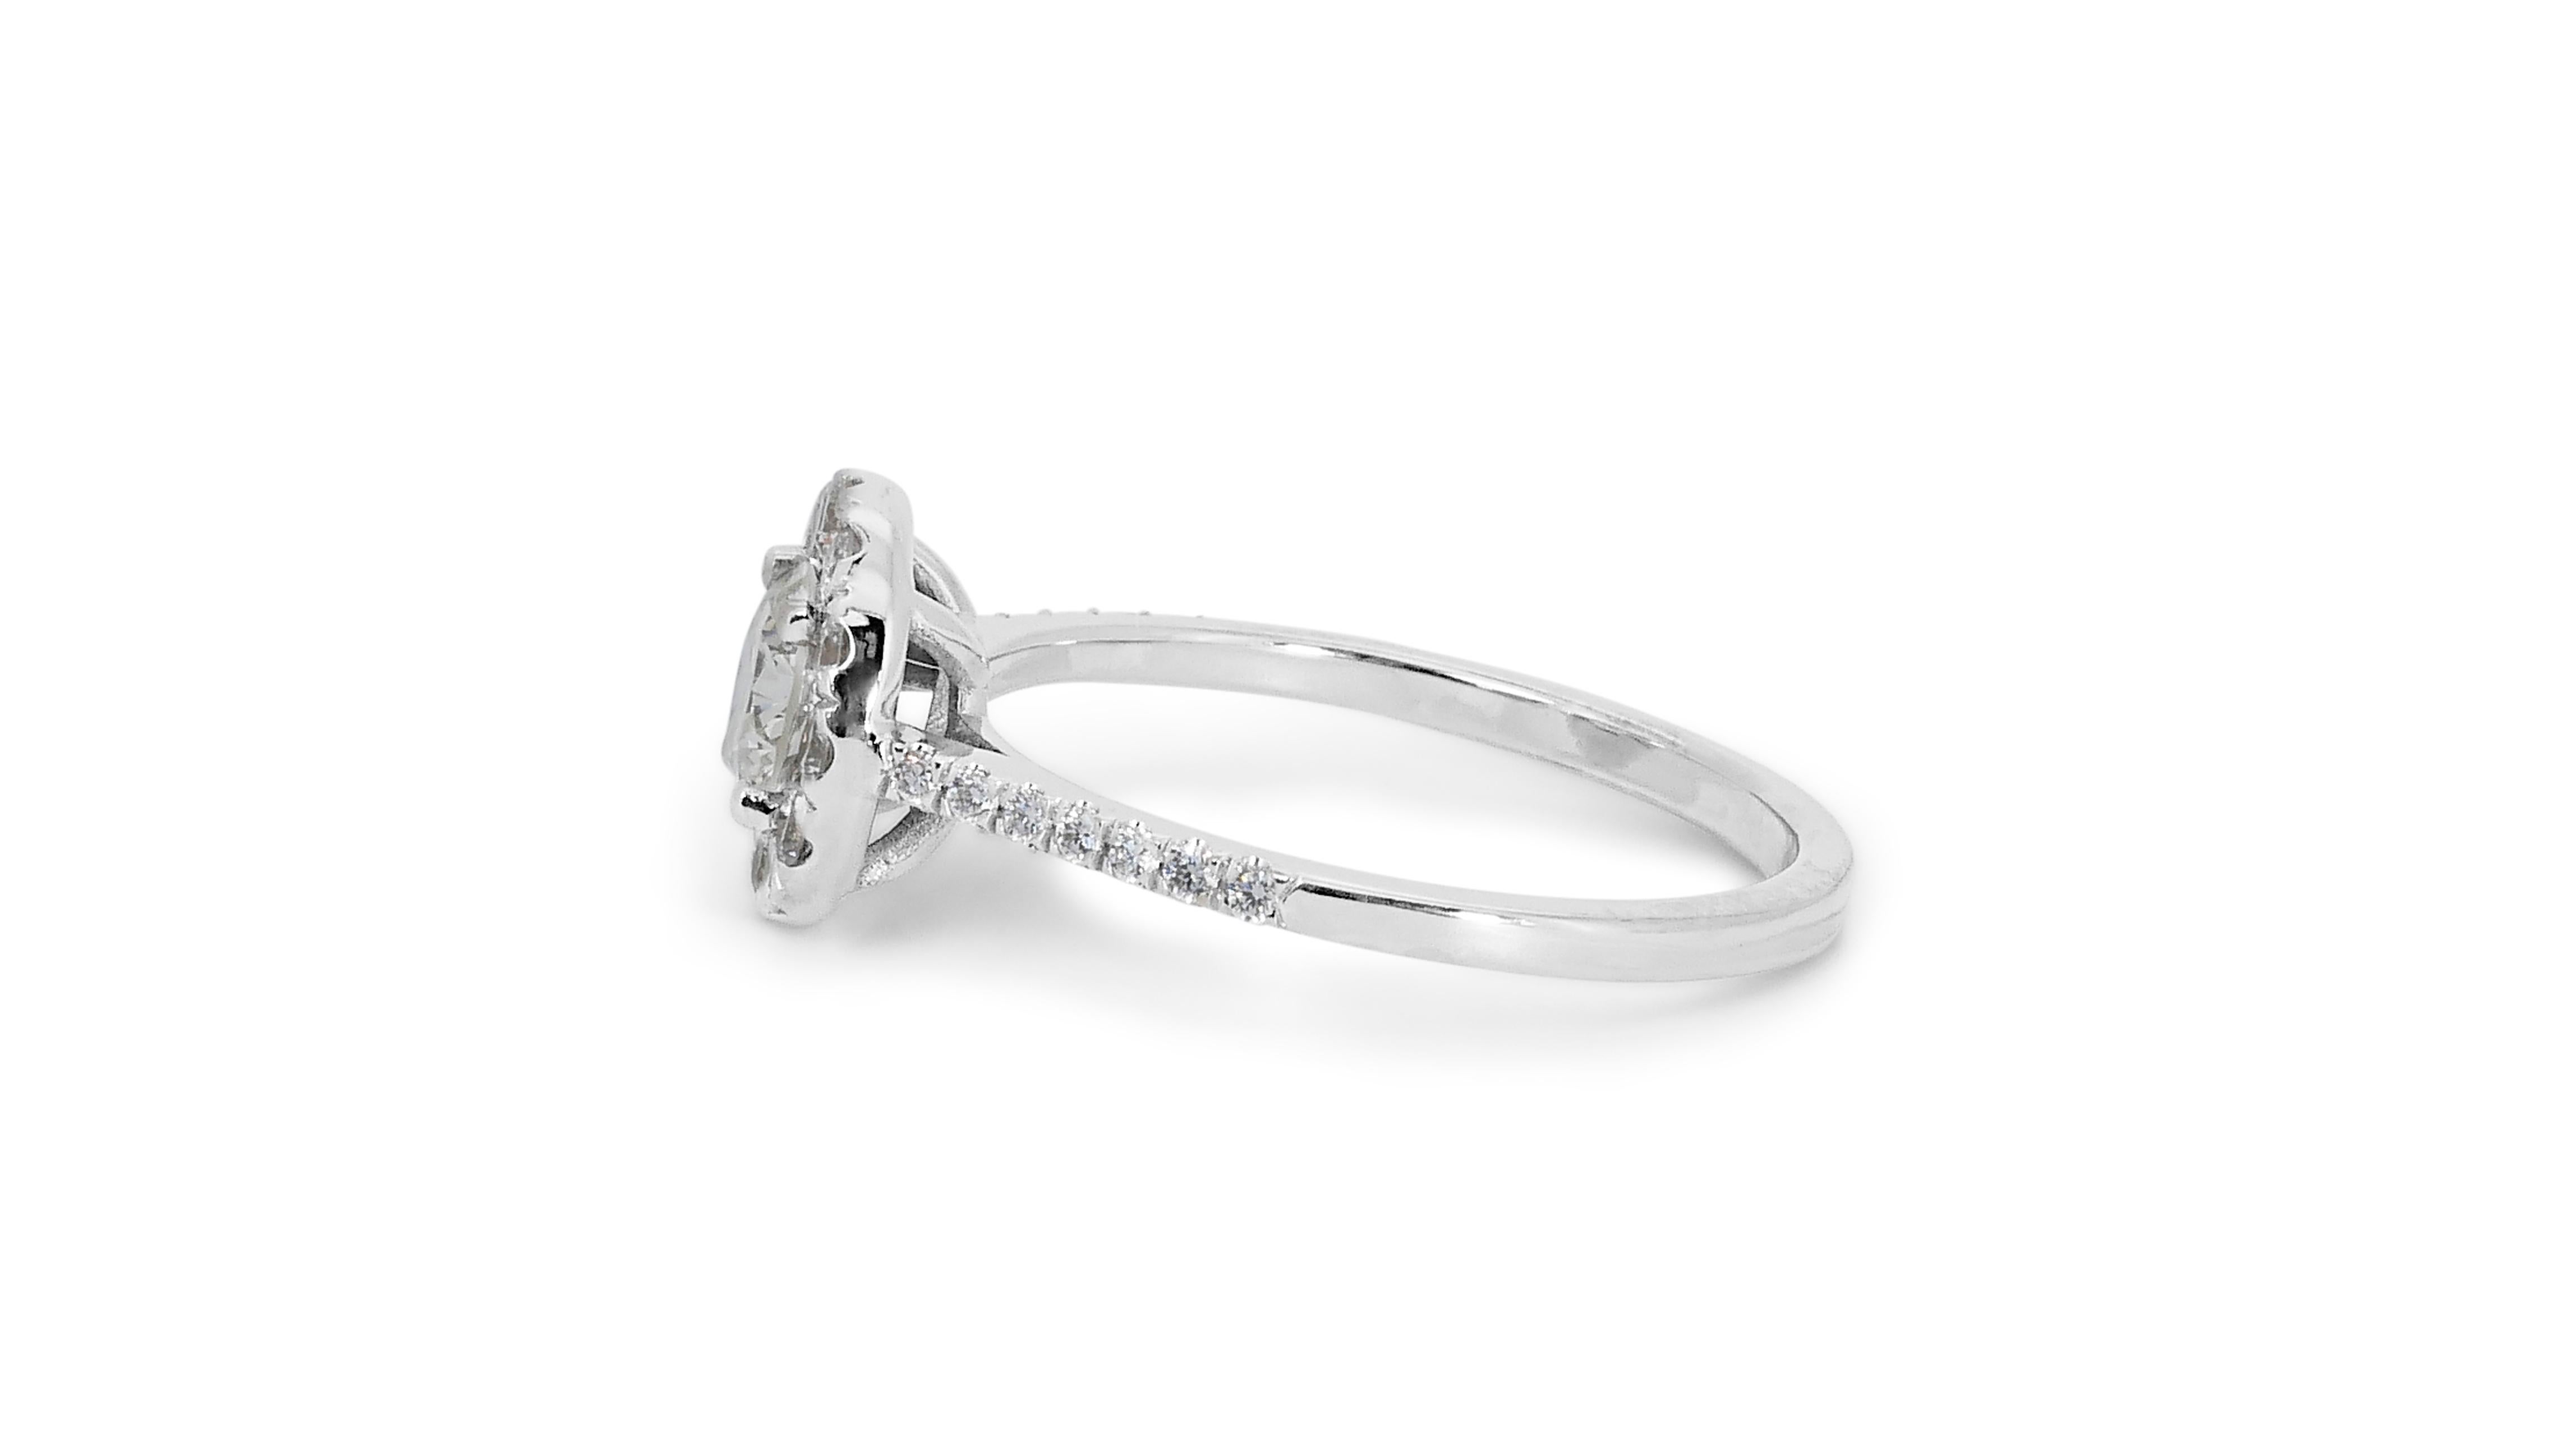 Glamorous 1.30ct Diamonds Halo Ring in 18k White Gold - GIA Certified For Sale 1